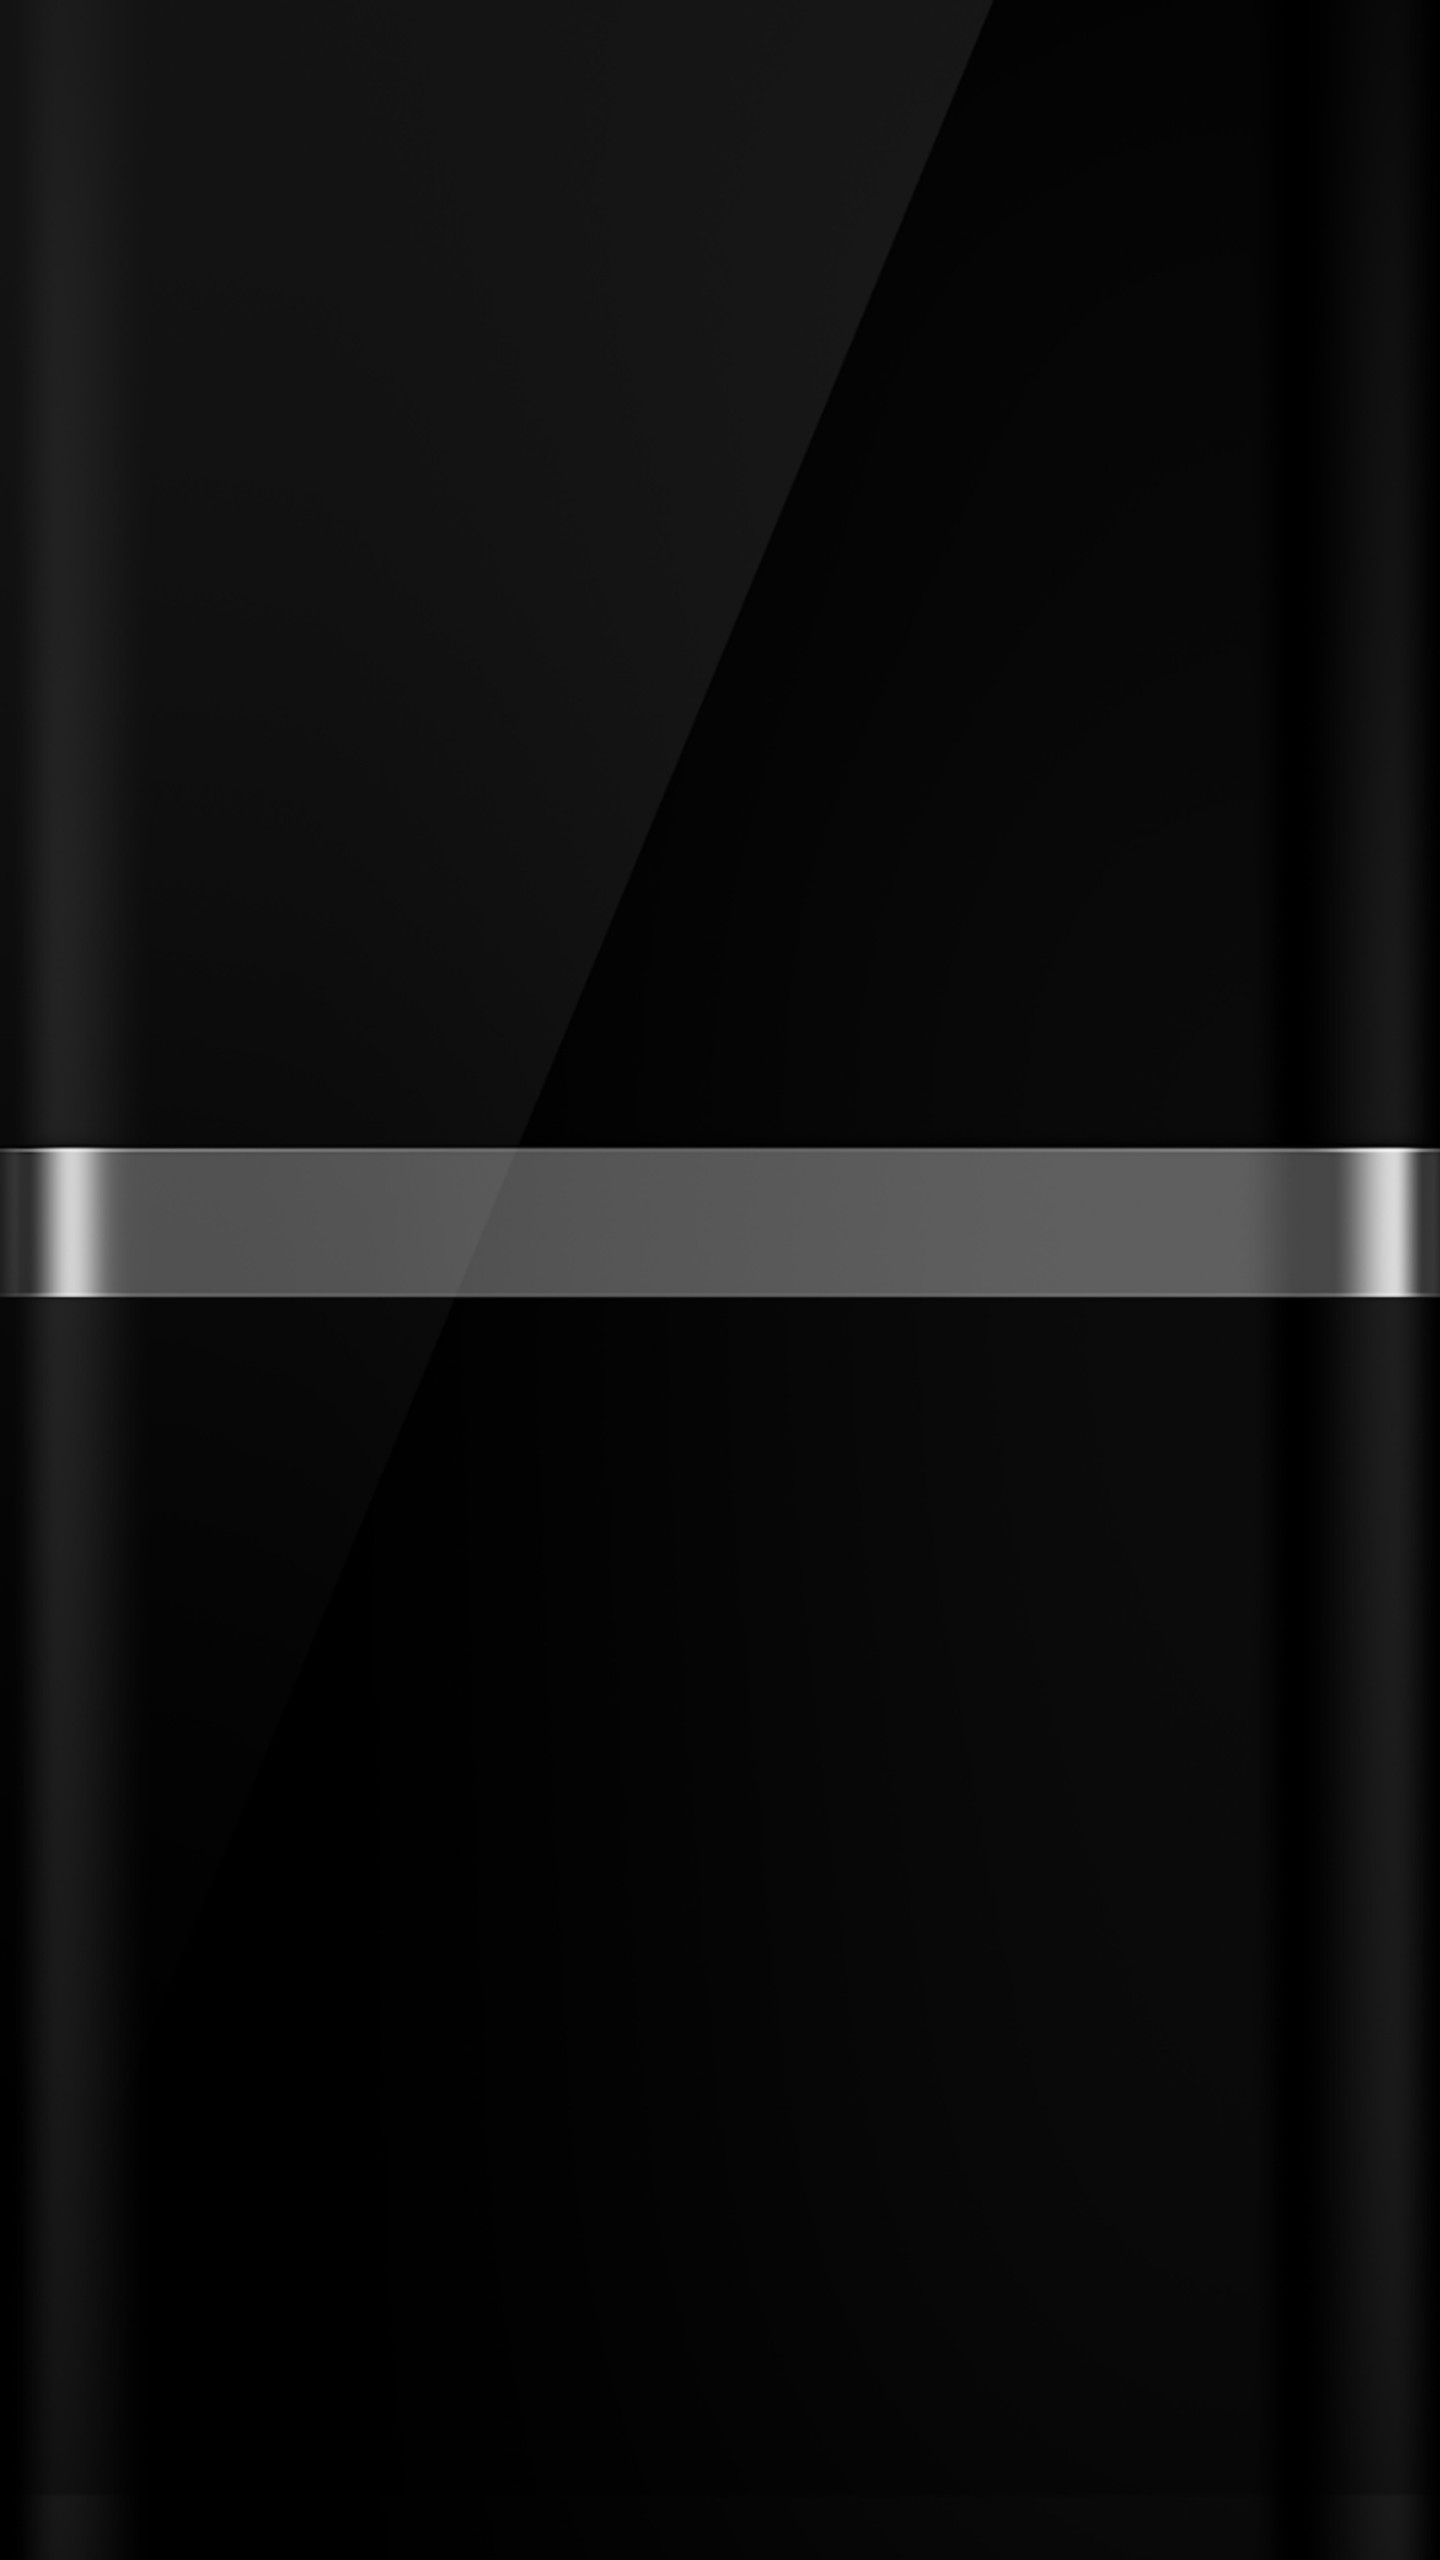 1440x2560 The Dark S7 Edge Wallpaper 08 with Black Background and Silver Line